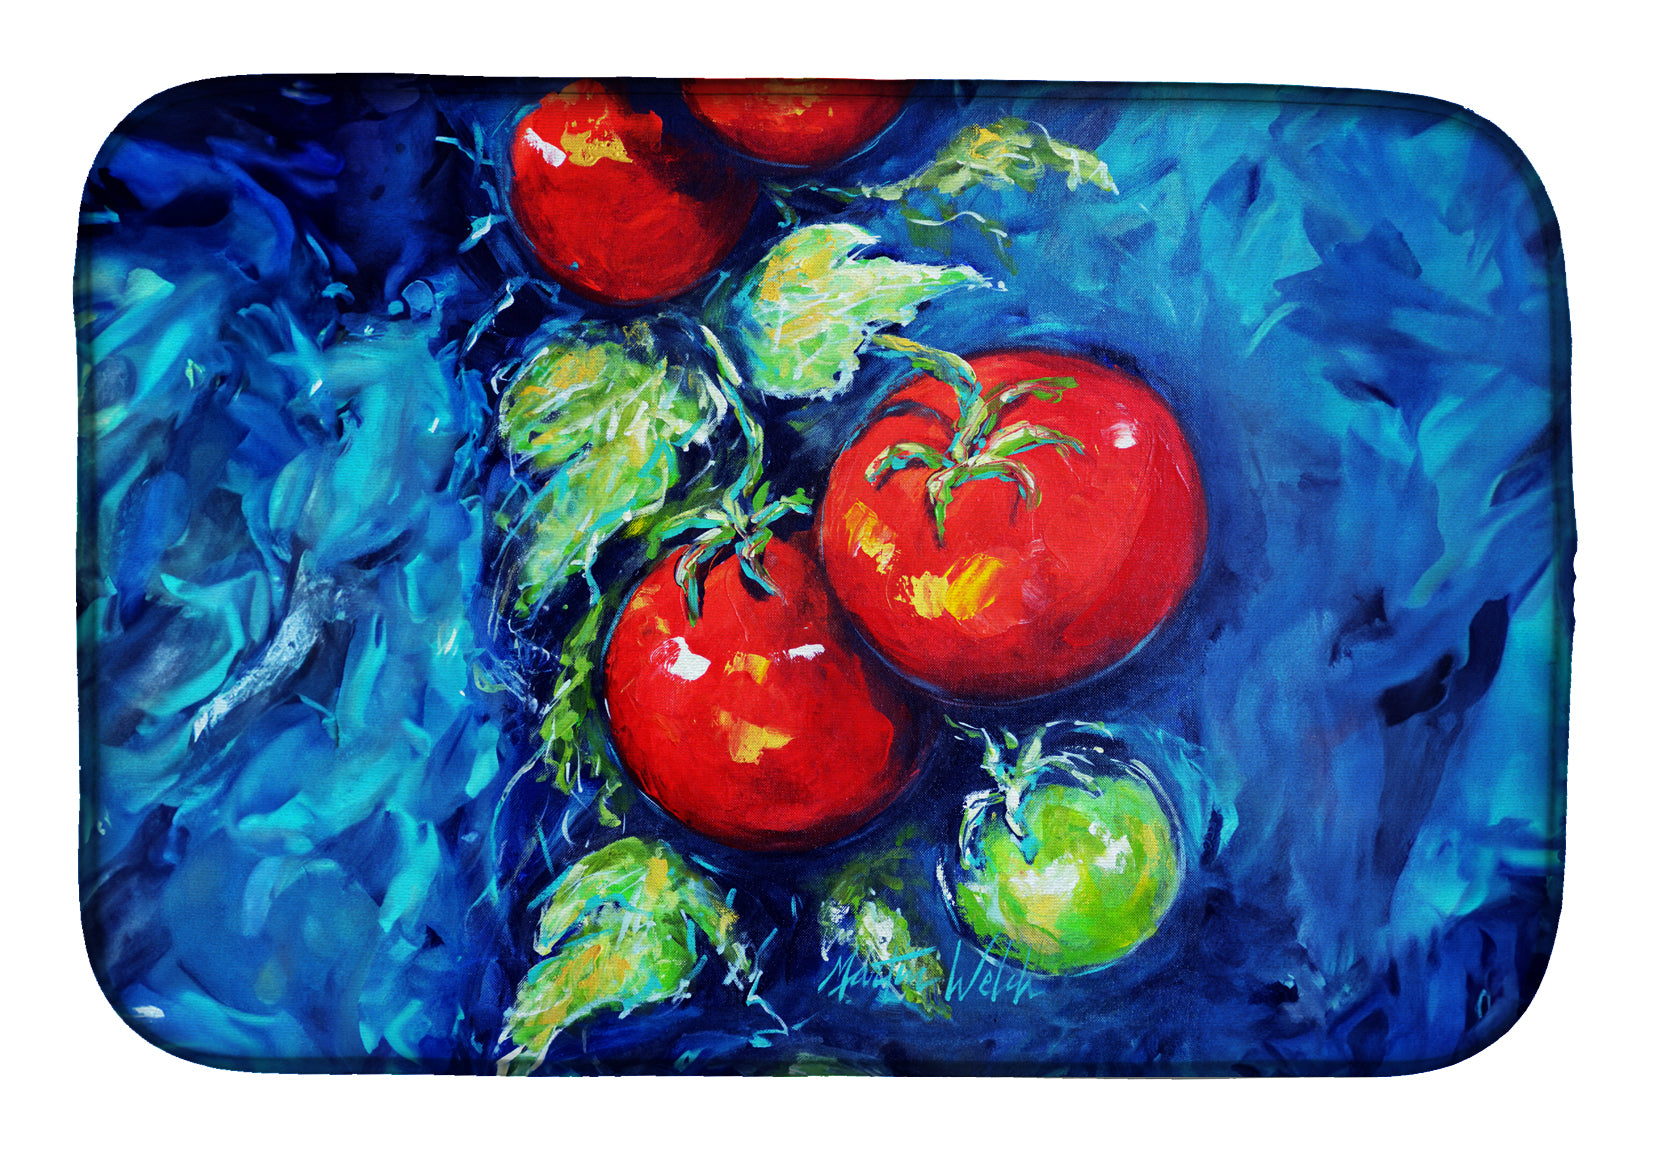 Buy this Creole Tomatoes Dish Drying Mat